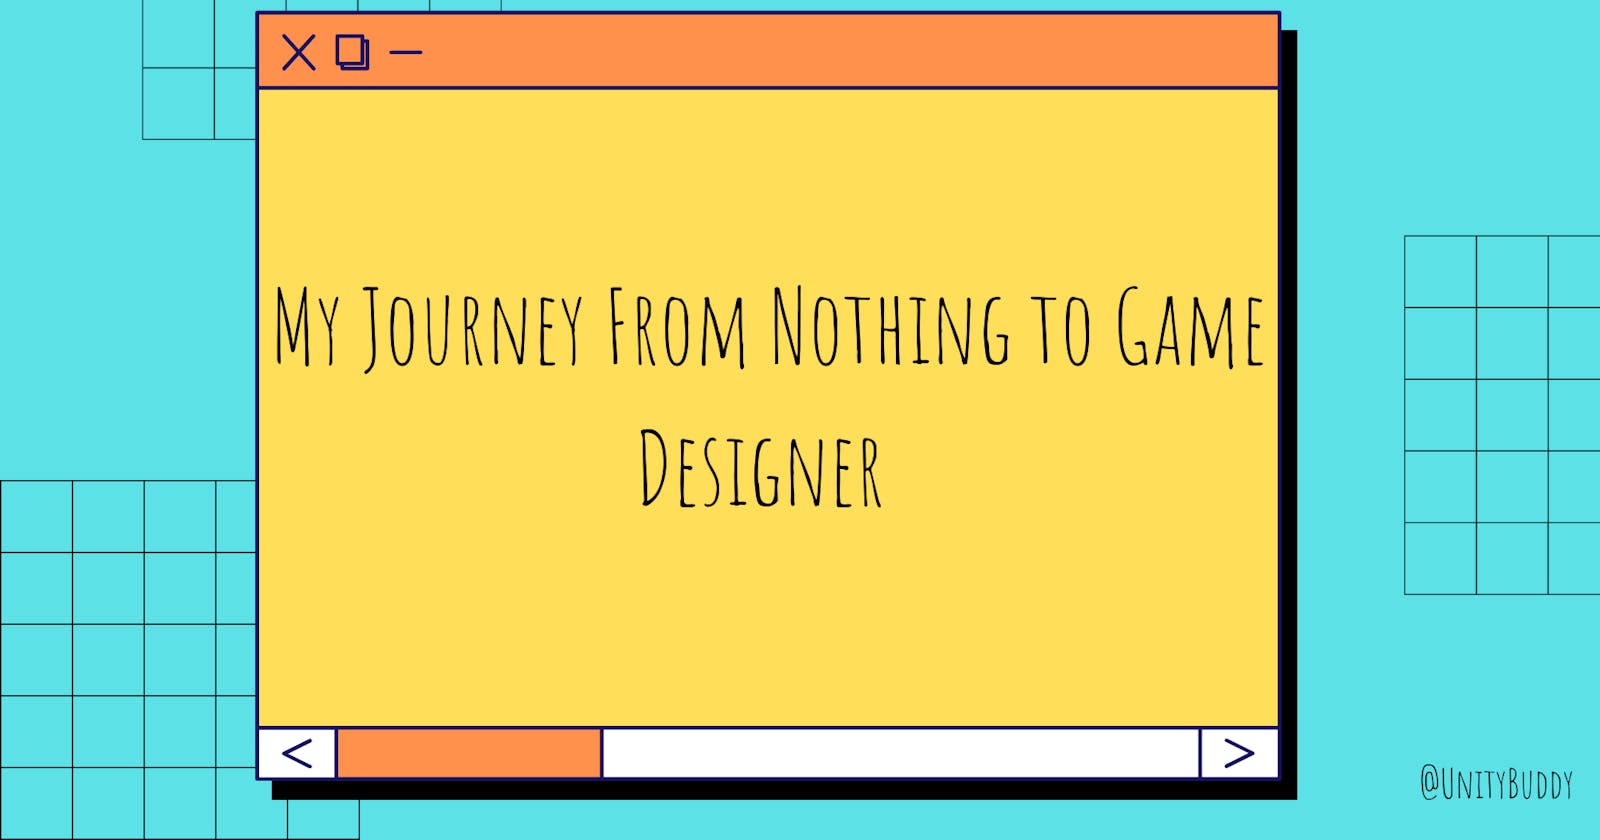 My Journey From Nothing to Game Designer